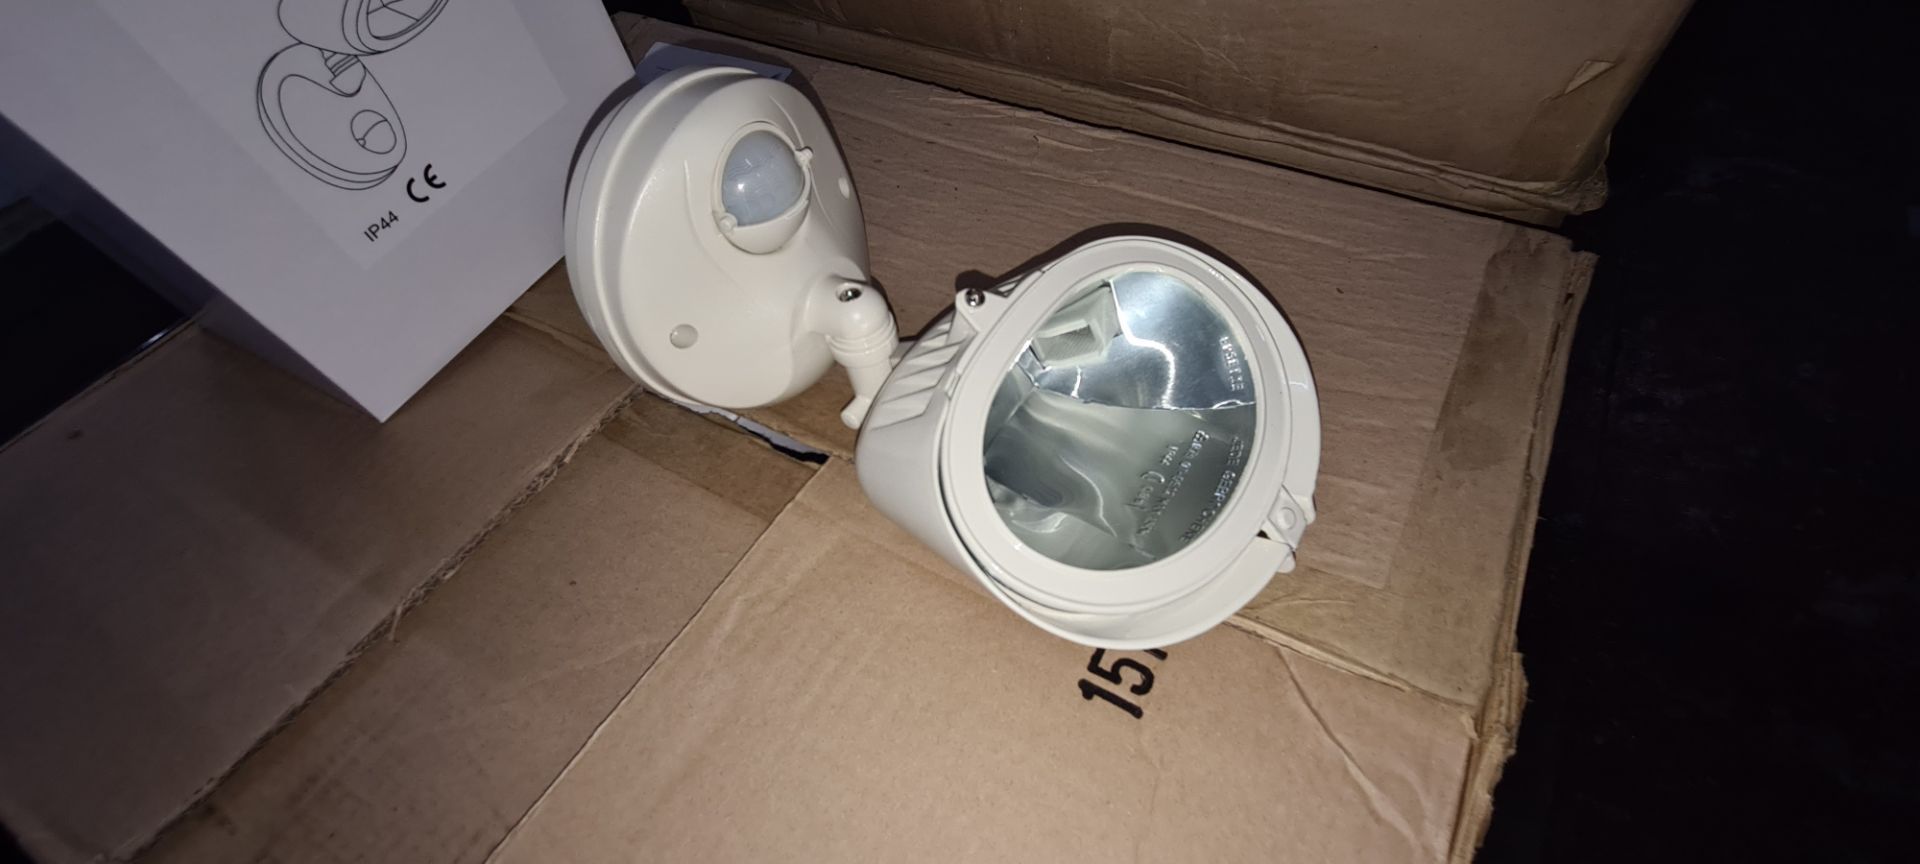 24 off 150W PIR detection floodlights - 2 large cartons - Image 2 of 4